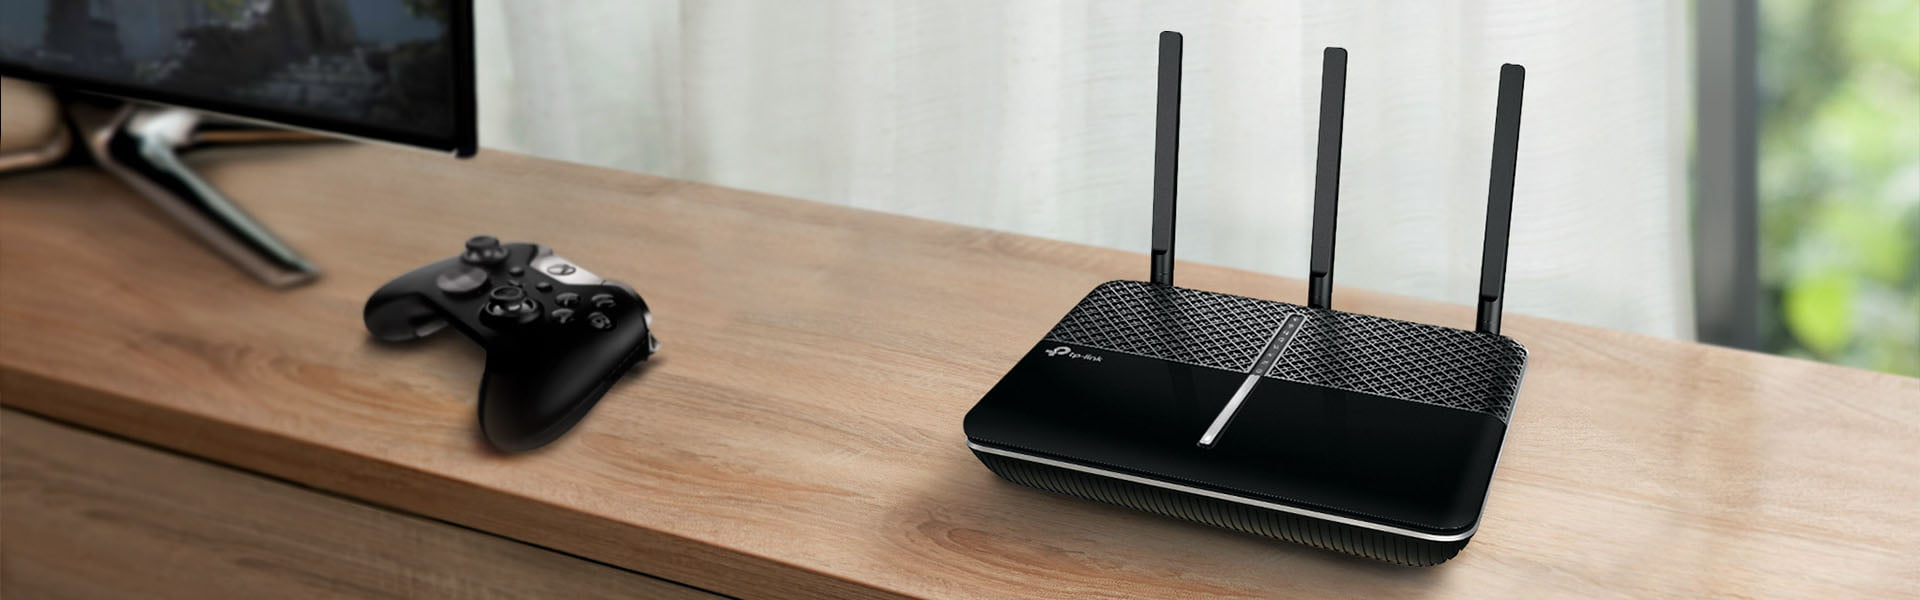 TP-Link Launches Archer C2300 MU-MIMO Wi-Fi Router 13